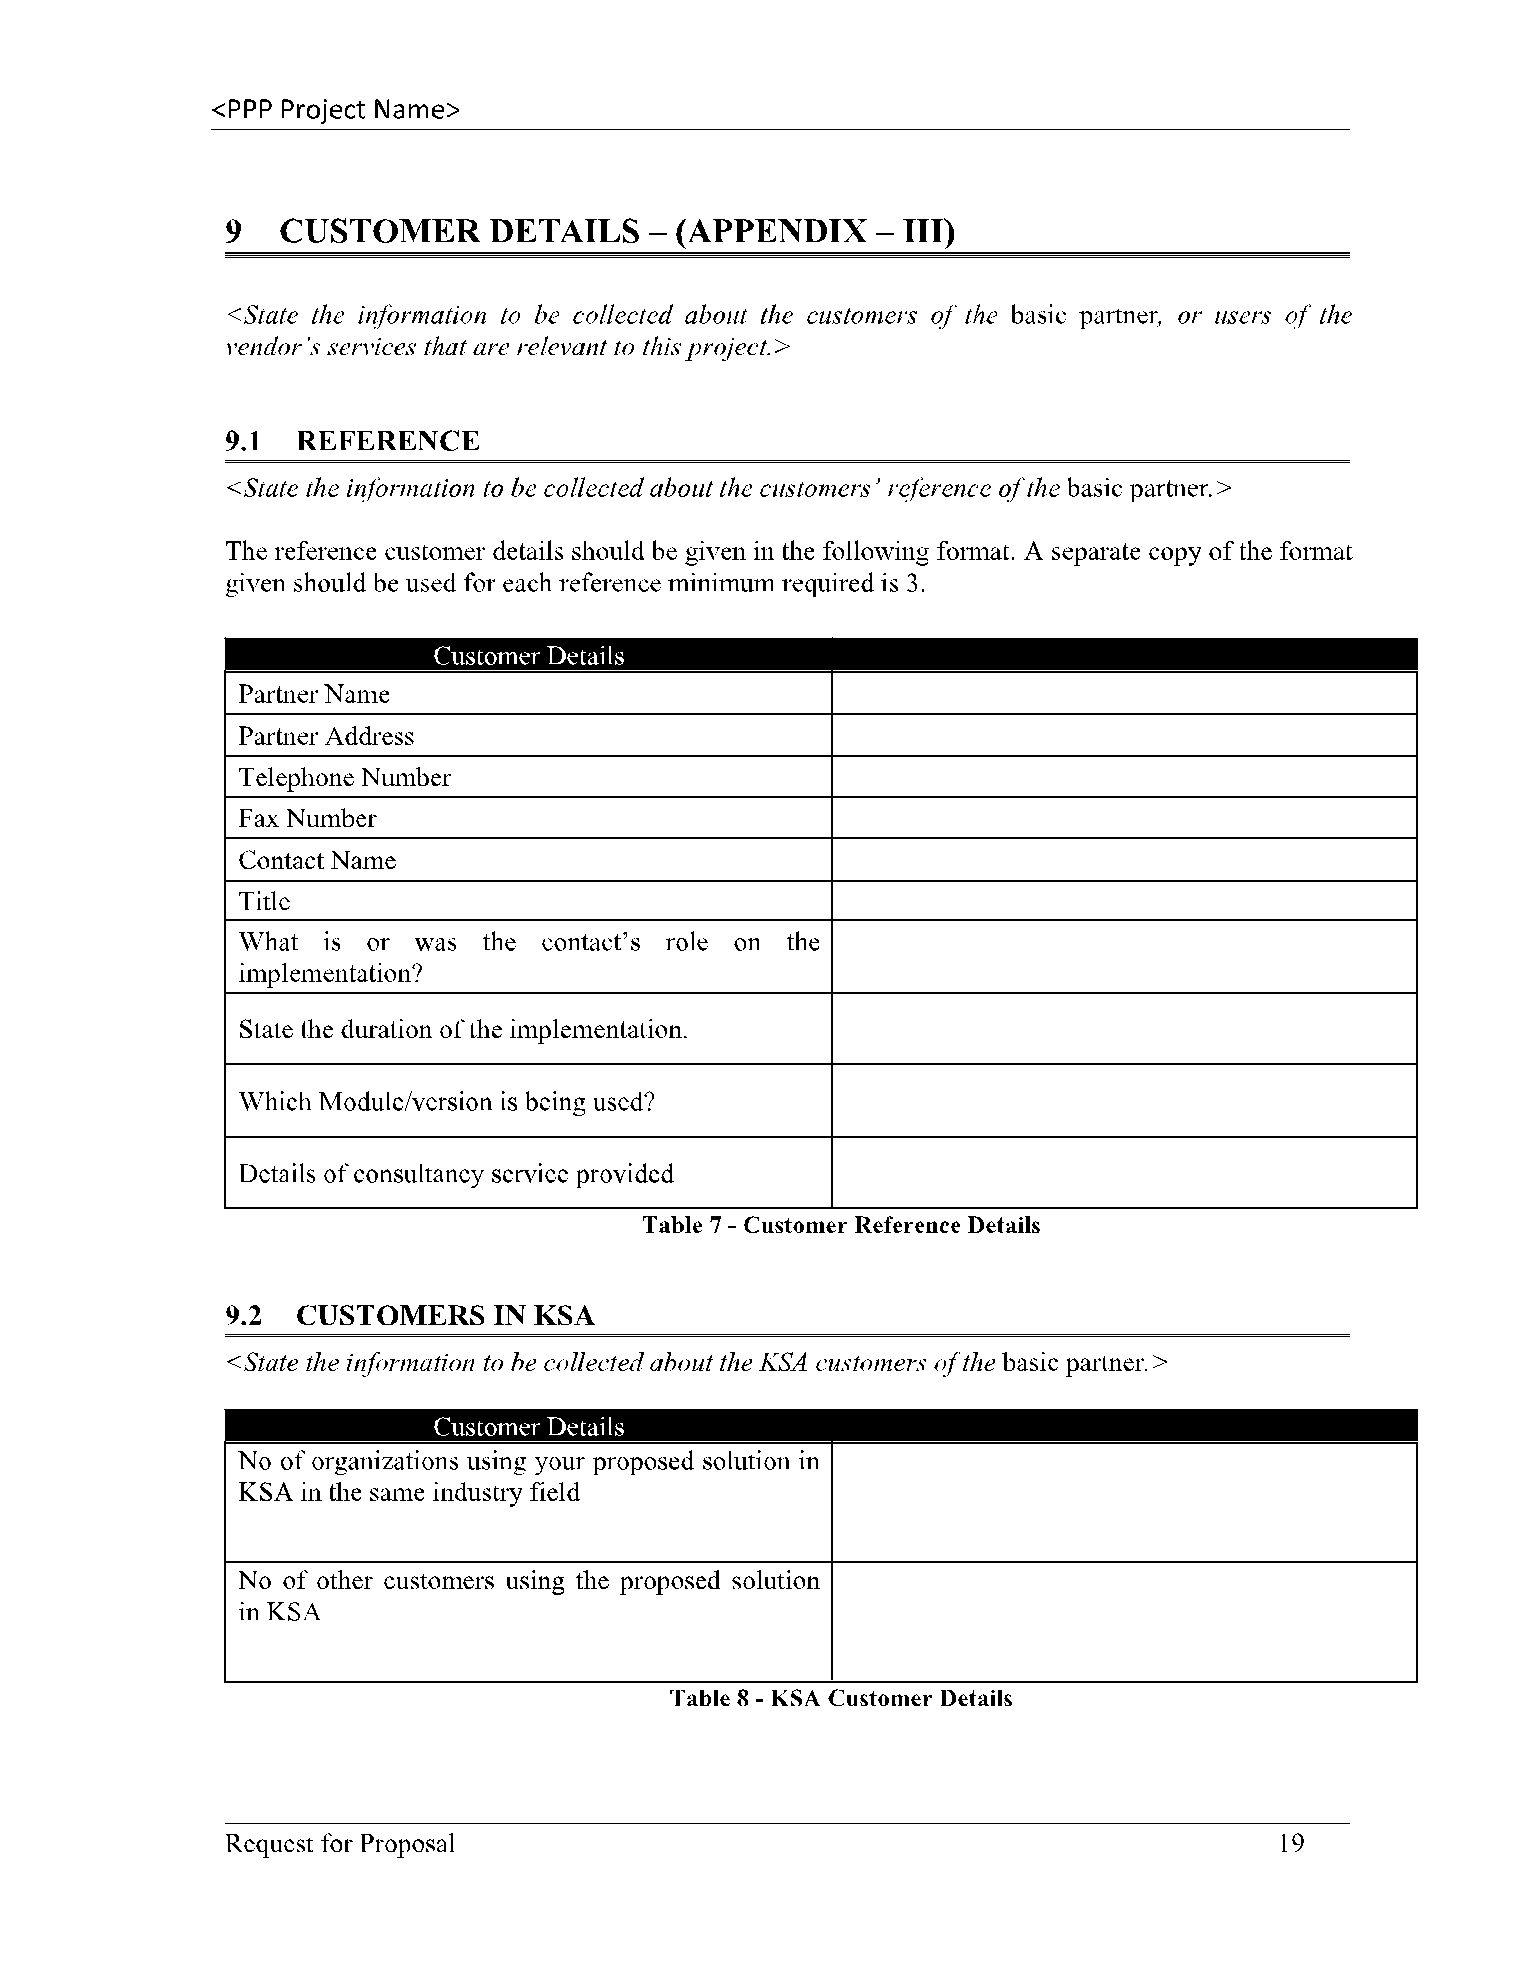 Request for Proposal Template 19